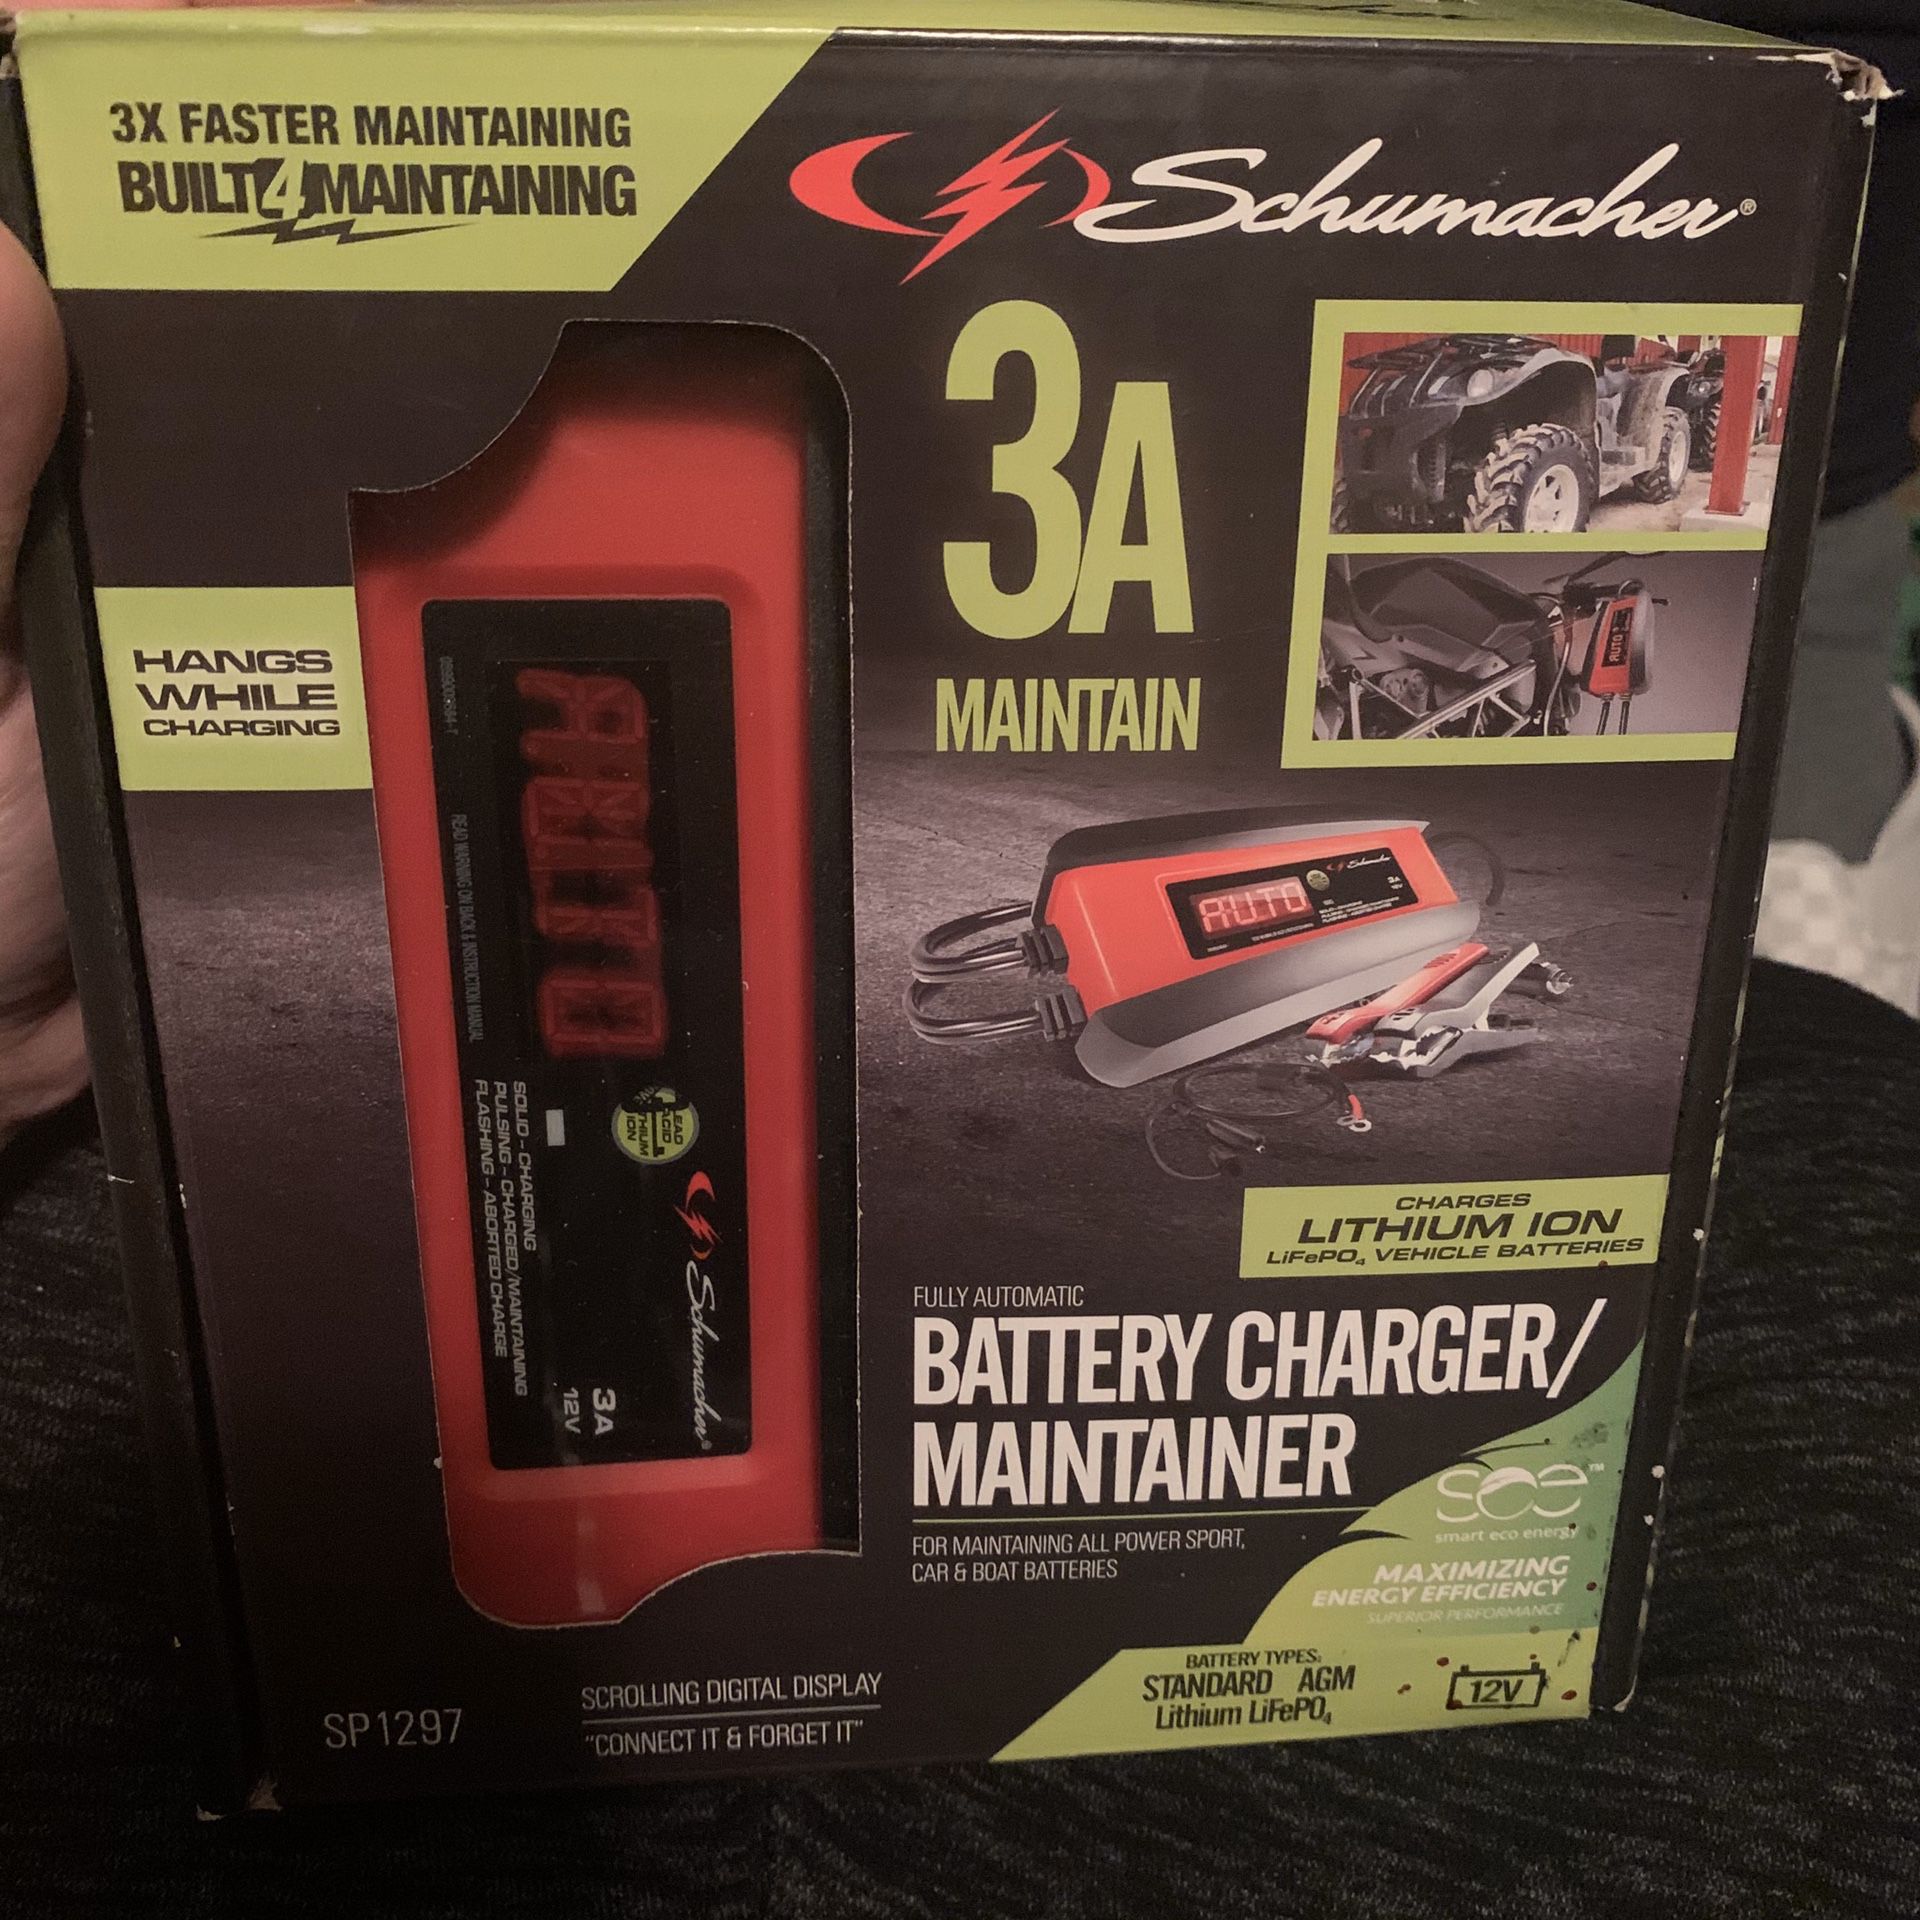 Battery charger/maintainer